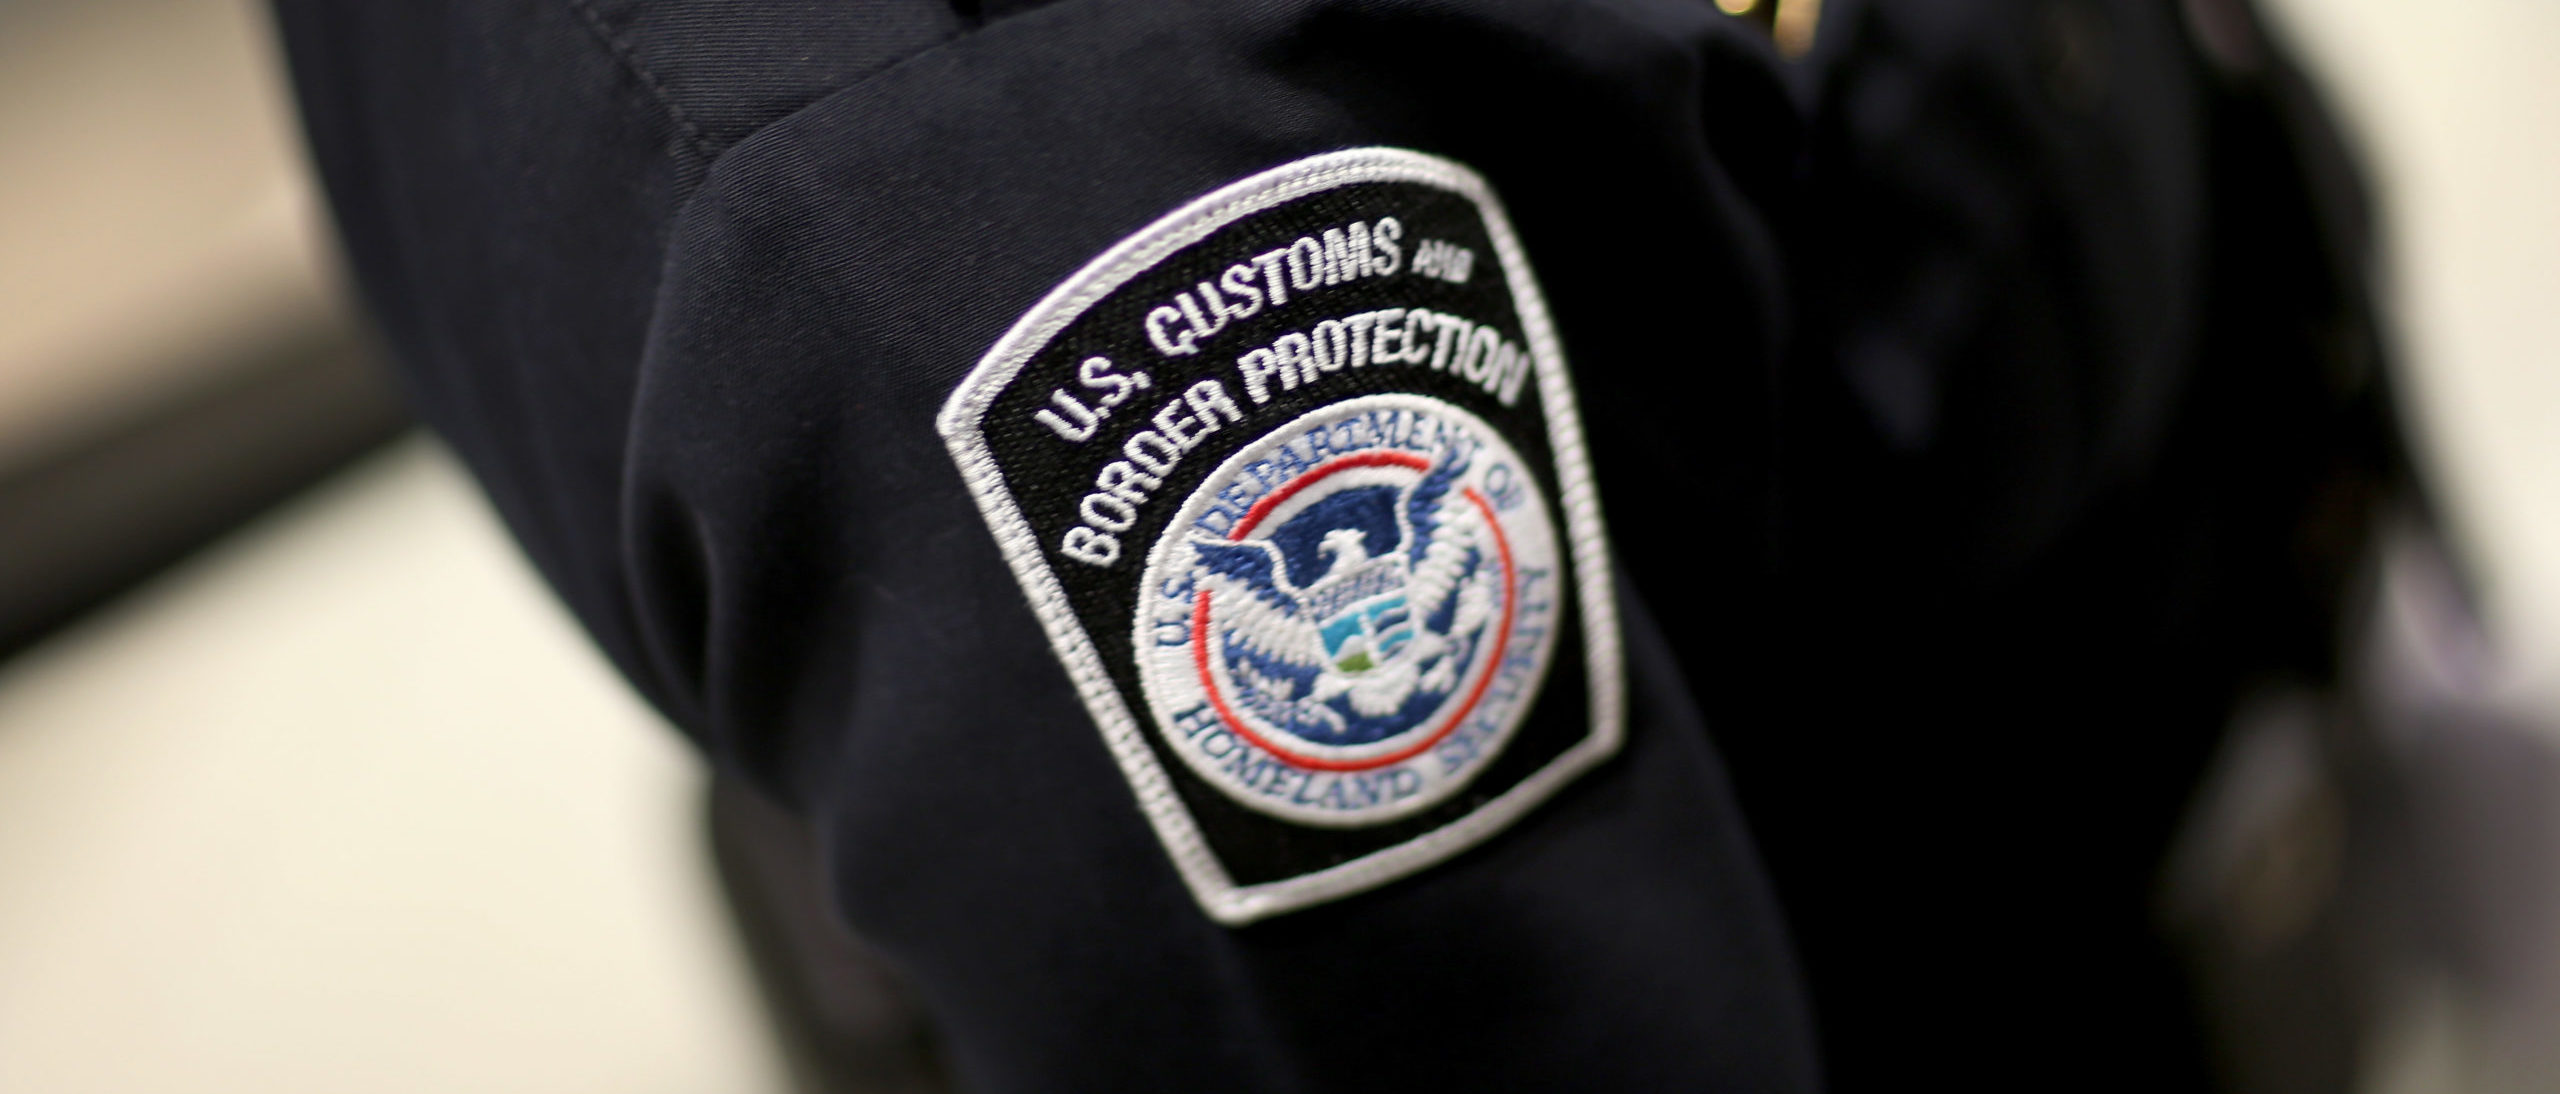 MIAMI, FL - MARCH 04: A U.S. Customs and Border Protection officer's patch is seen as they unveil a new mobile app for international travelers arriving at Miami International Airport on March 4, 2015 in Miami, Florida. (Photo by Joe Raedle/Getty Images)